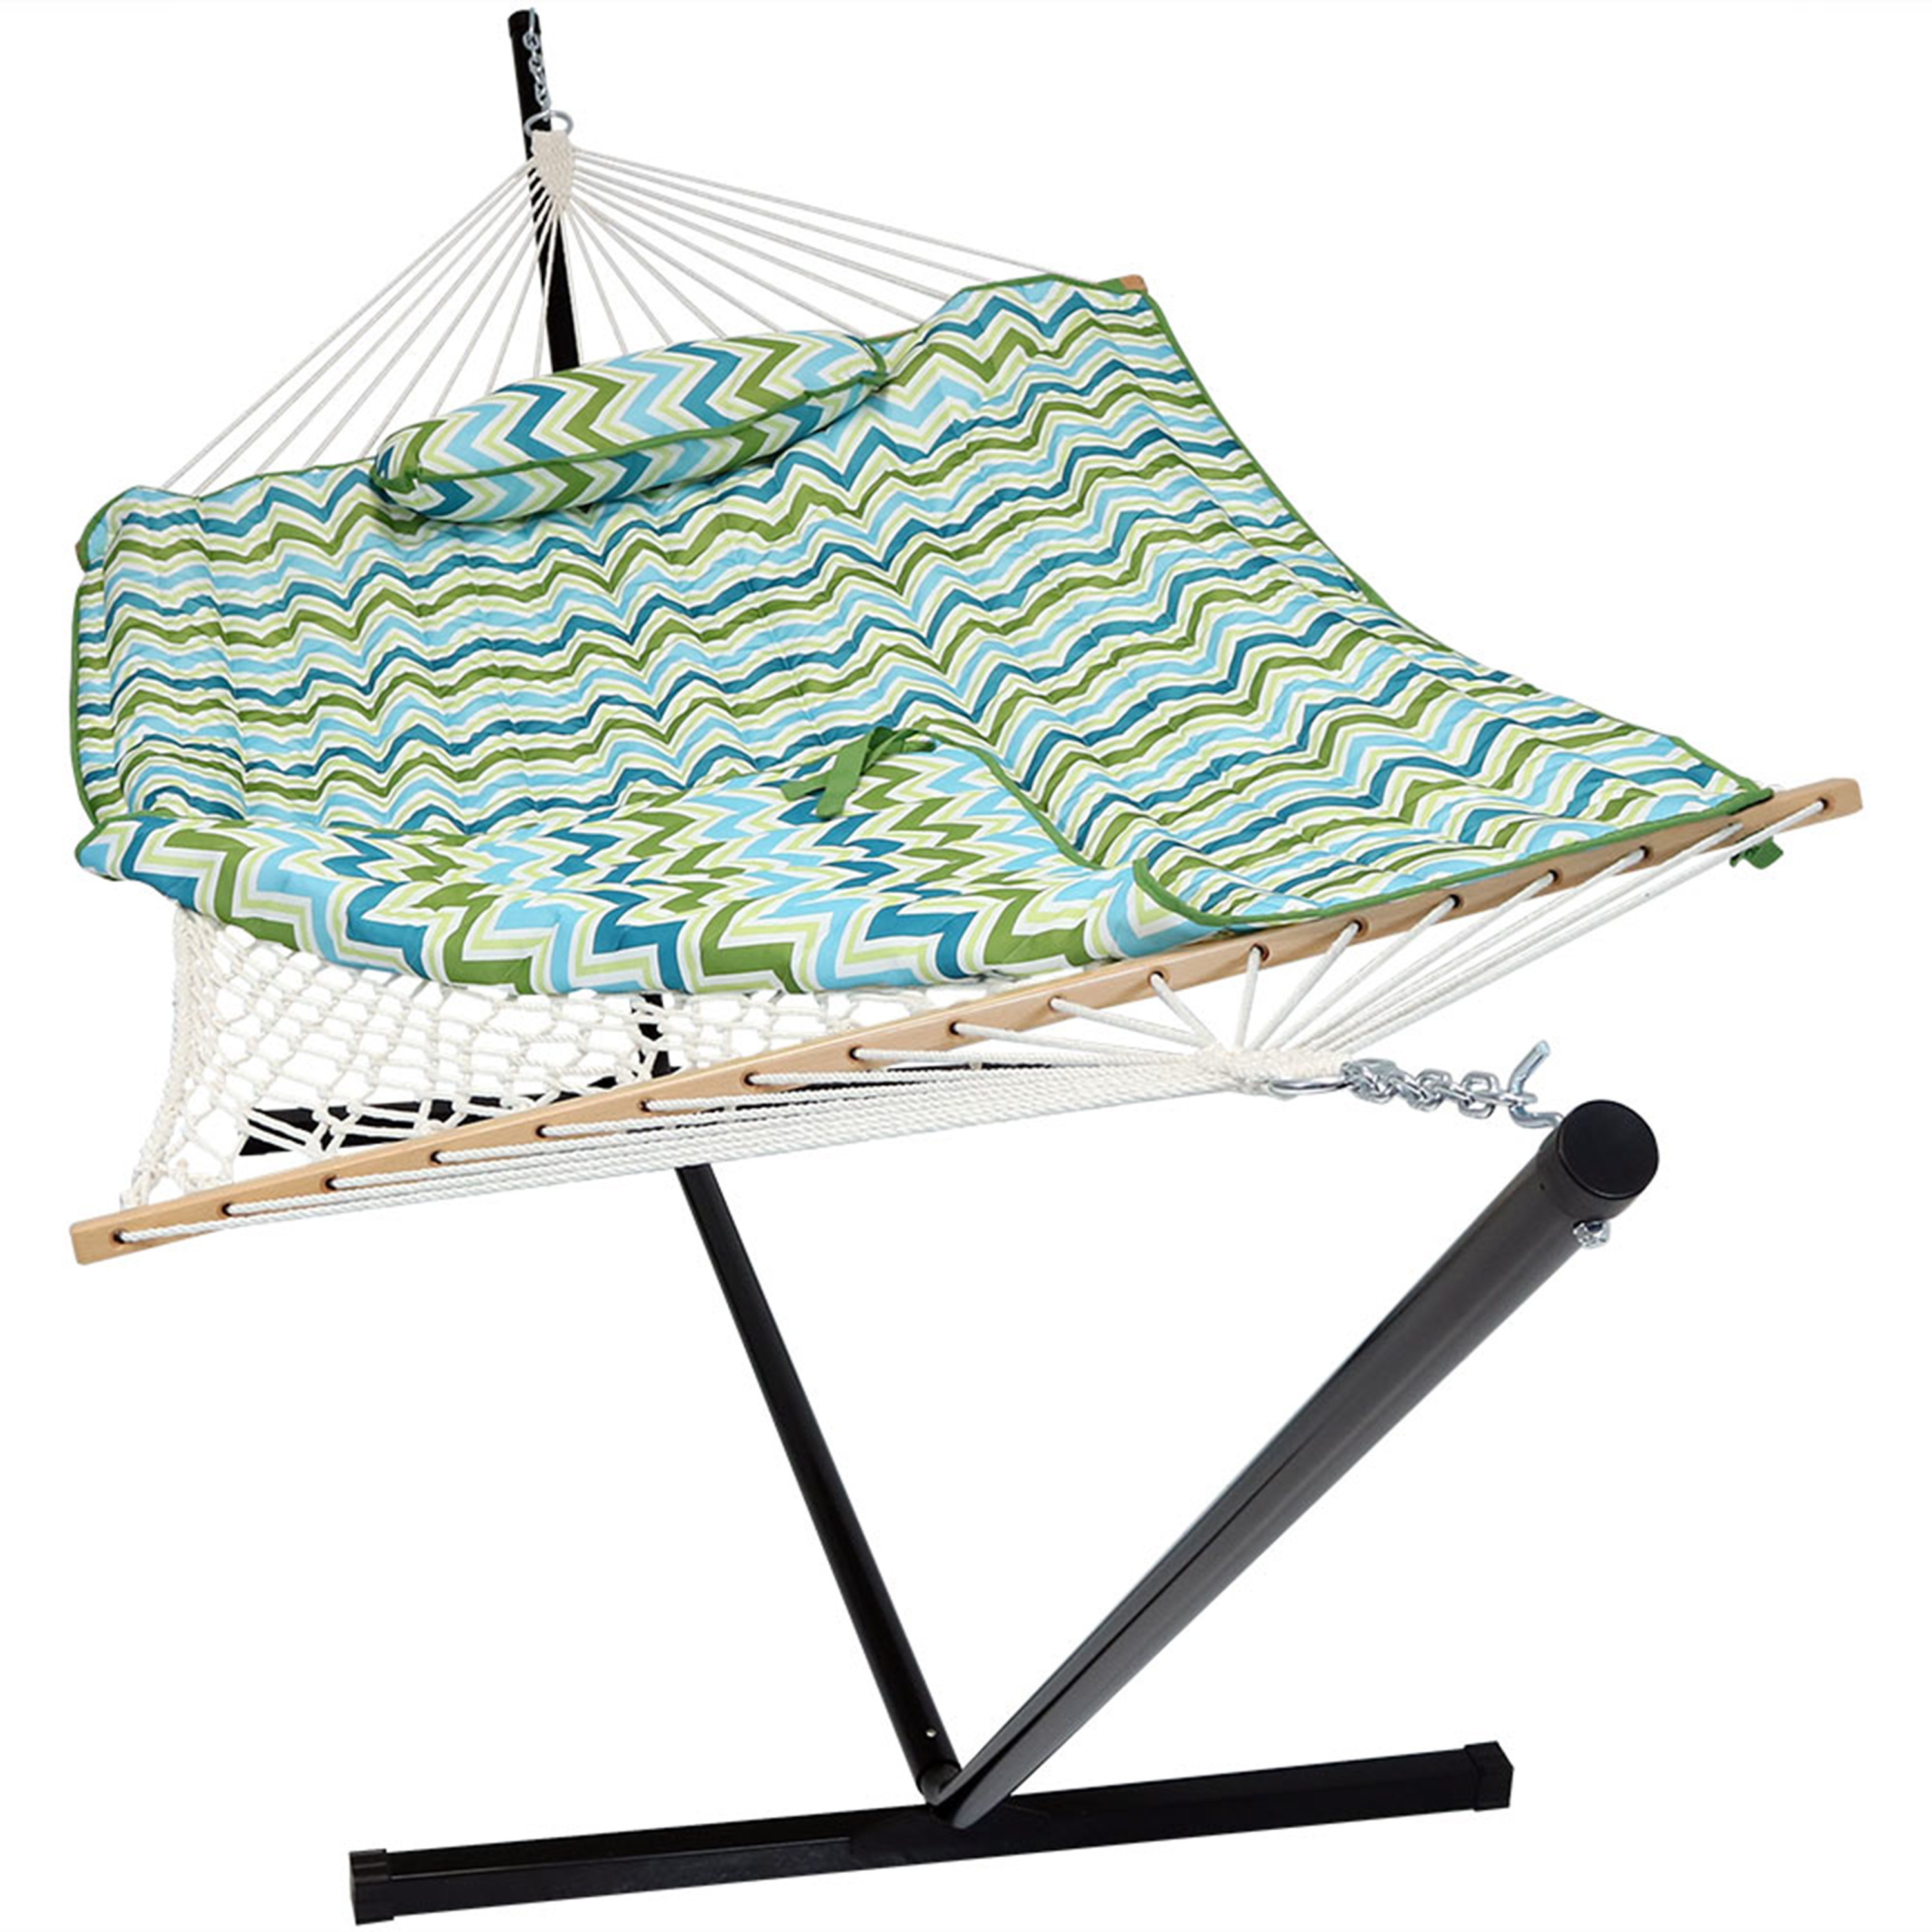 Sunnydaze Cotton Rope Hammock with 12 Foot Steel Stand, Pad and Pillow, 275 Pound Capacity, Blue & Green Chevron